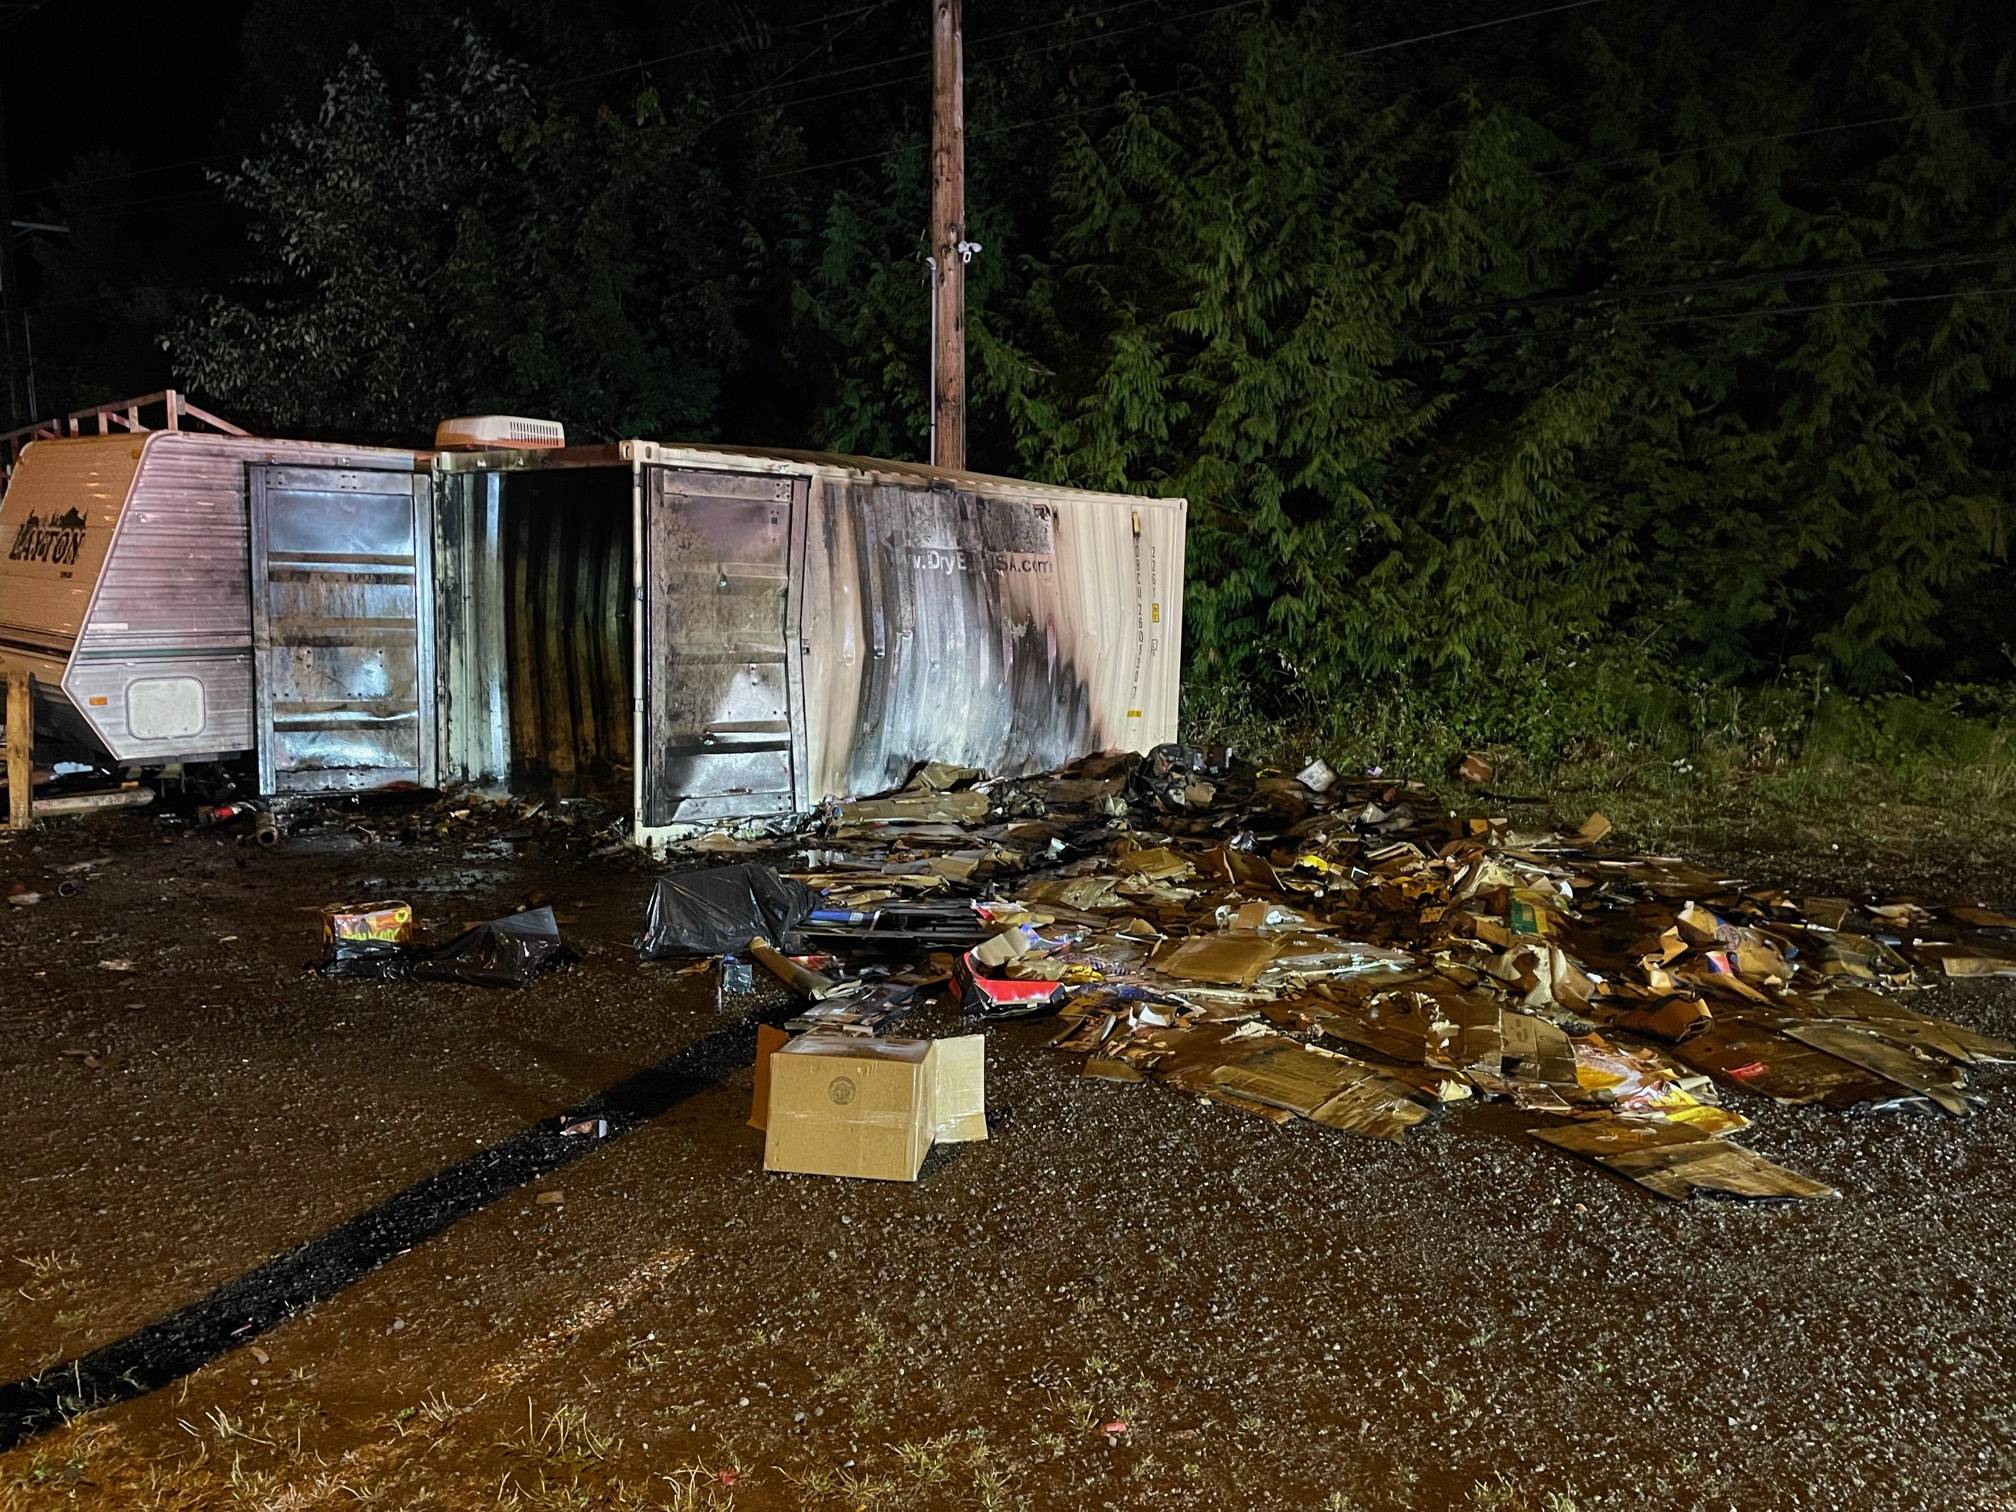 Aftermath of a container full of live fireworks that caught fire in Suquamish. Courtesy Photo